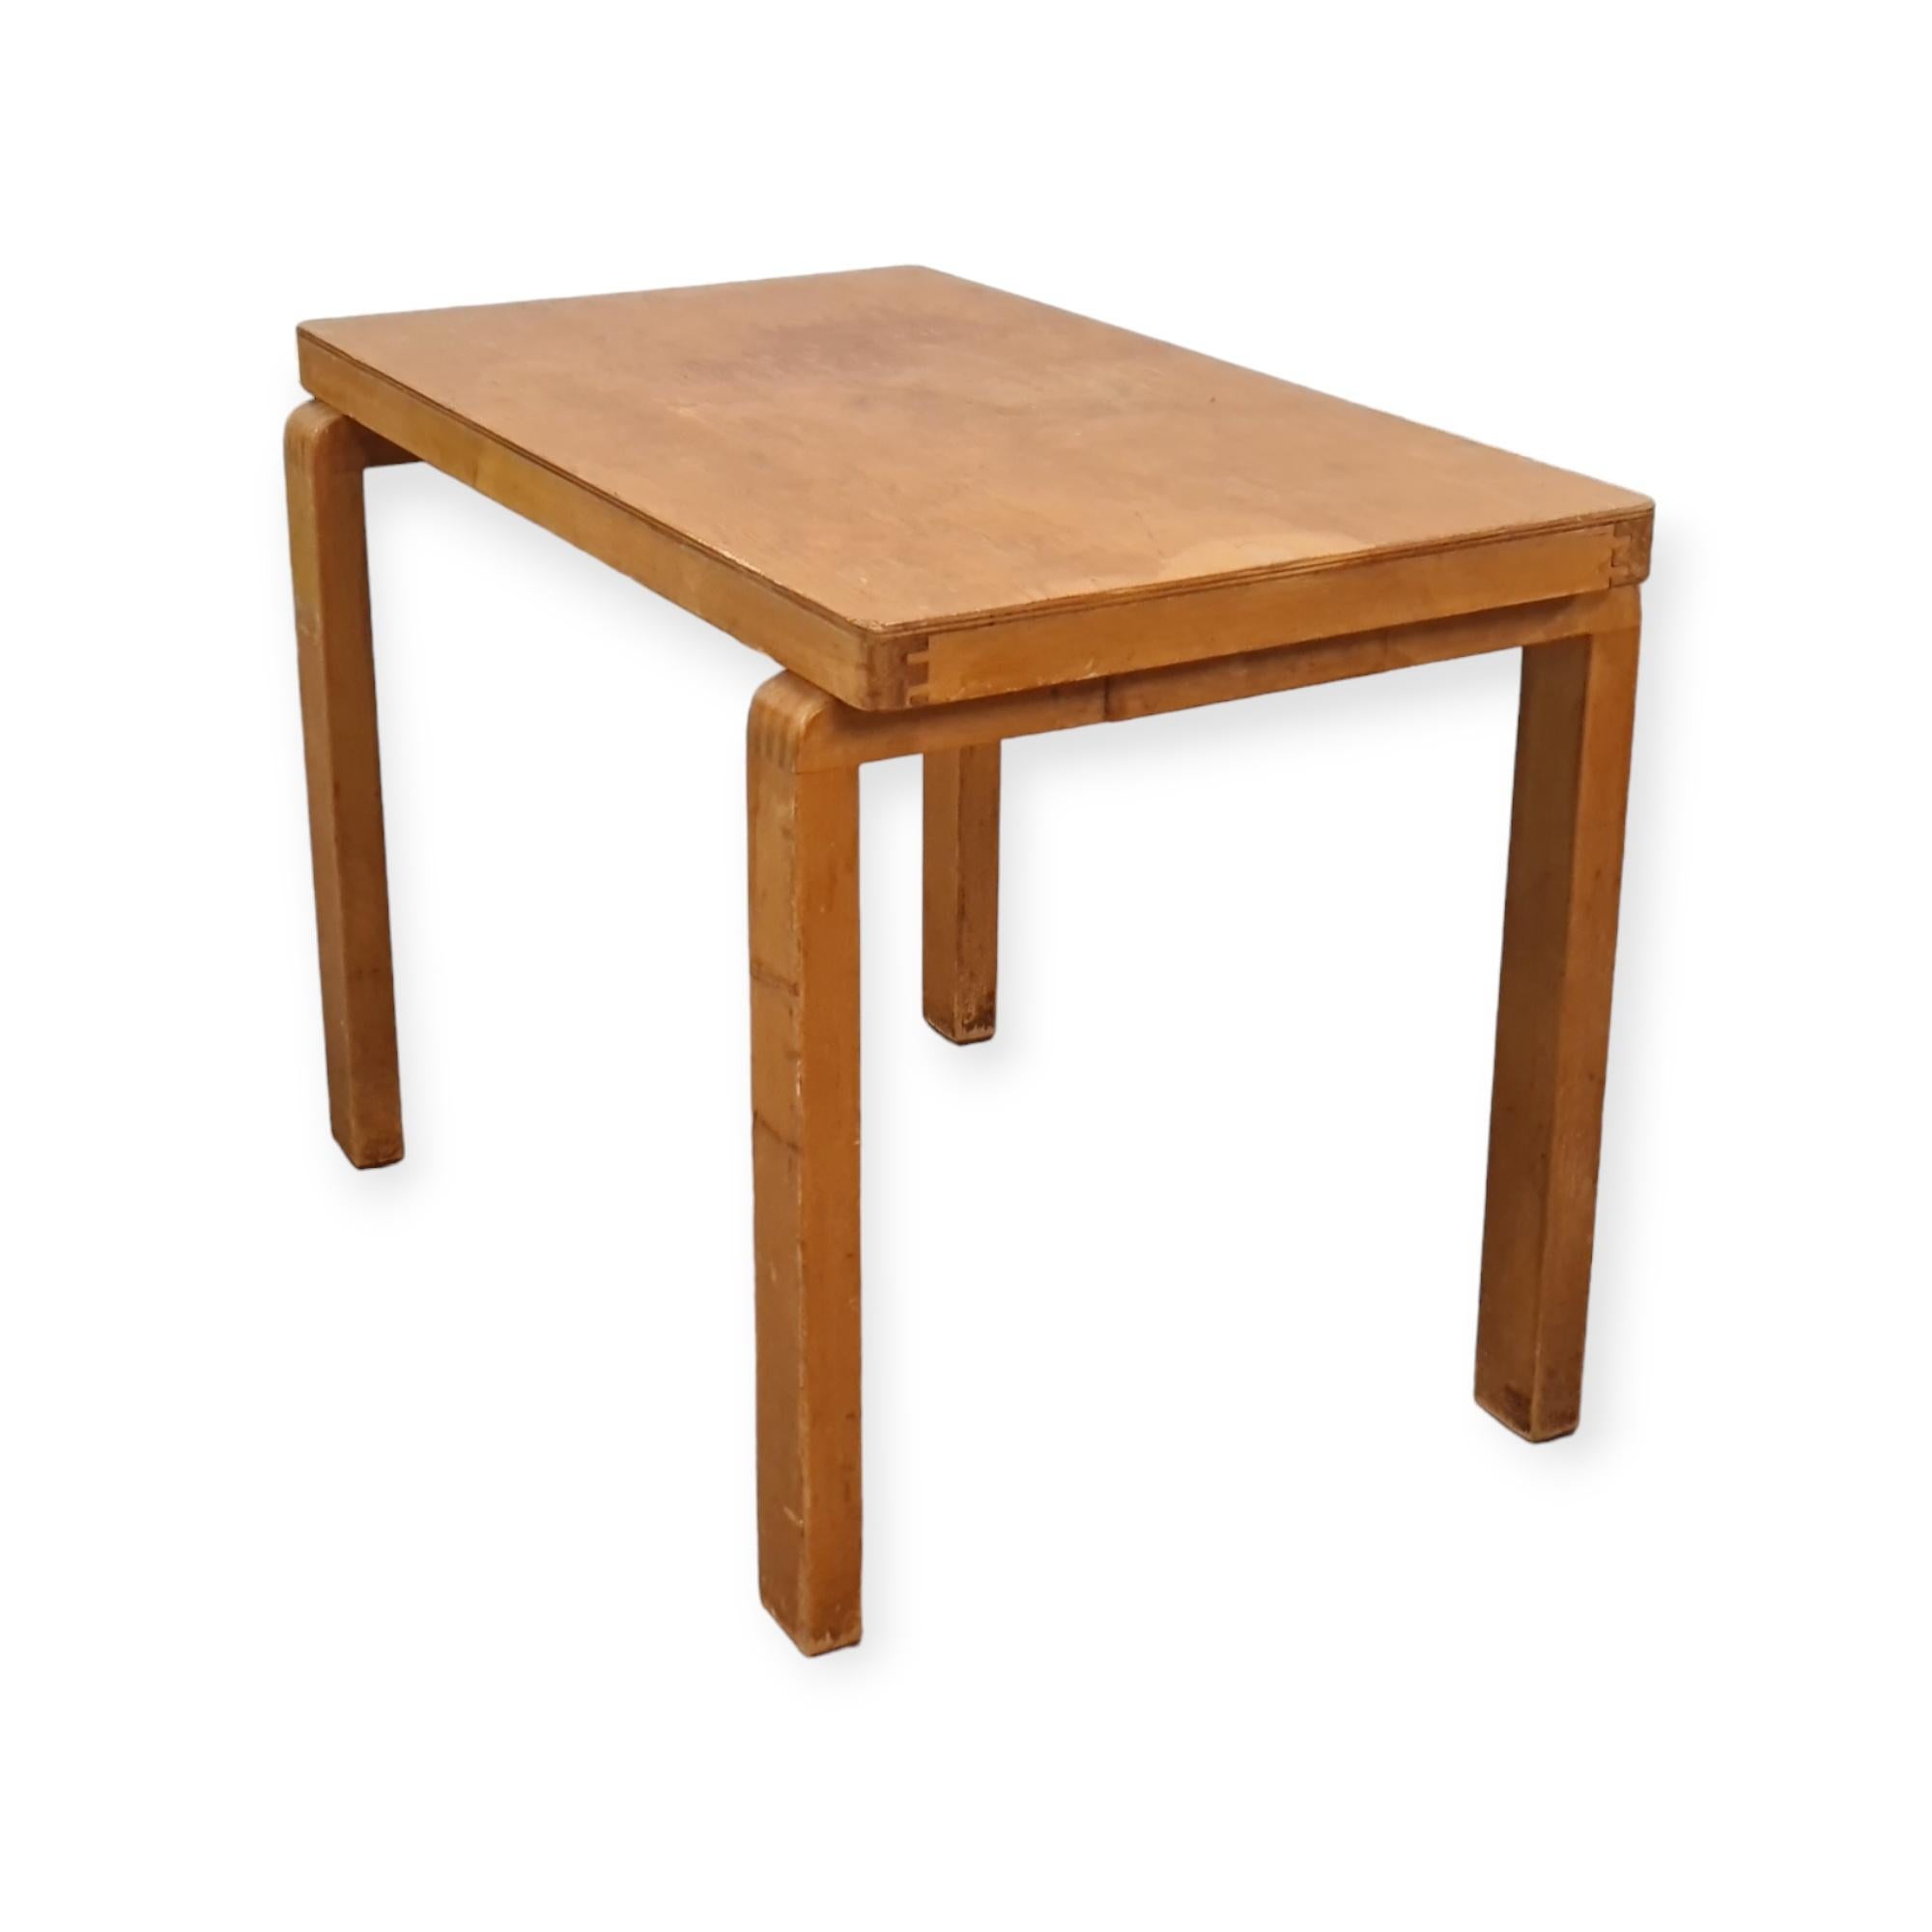 Mid-20th Century An Exceptionally Rare Alvar Aalto War-time Side table, 1940s For Sale